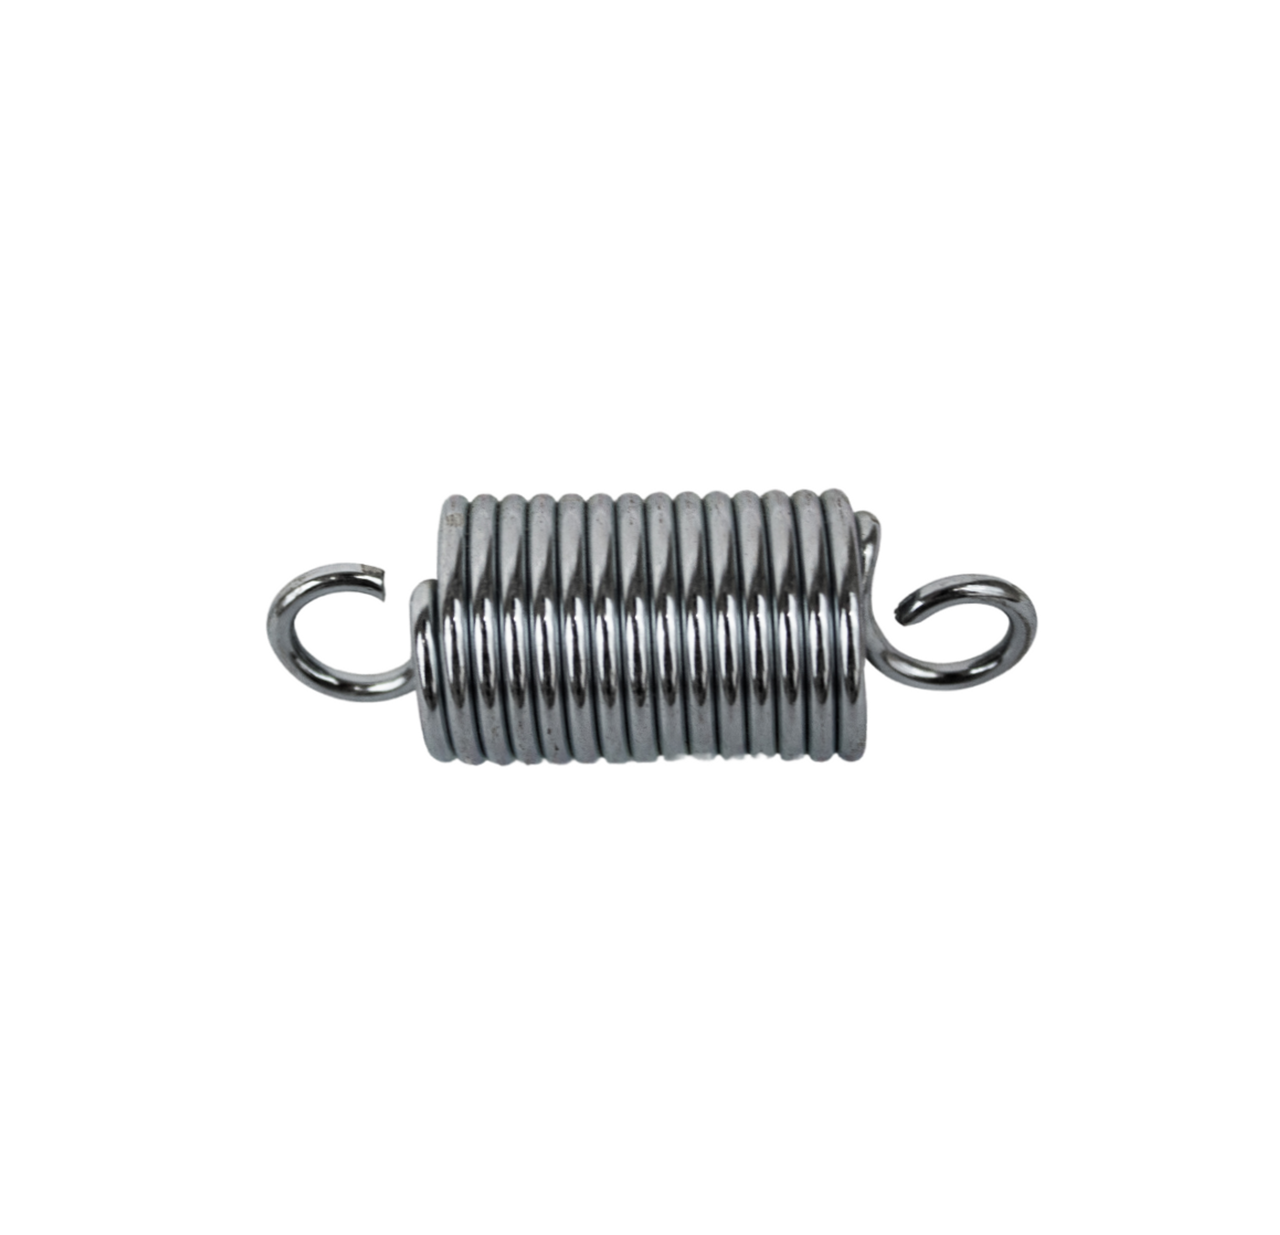 Retraction Spring For Hollymatic Patty Maker 500-0556